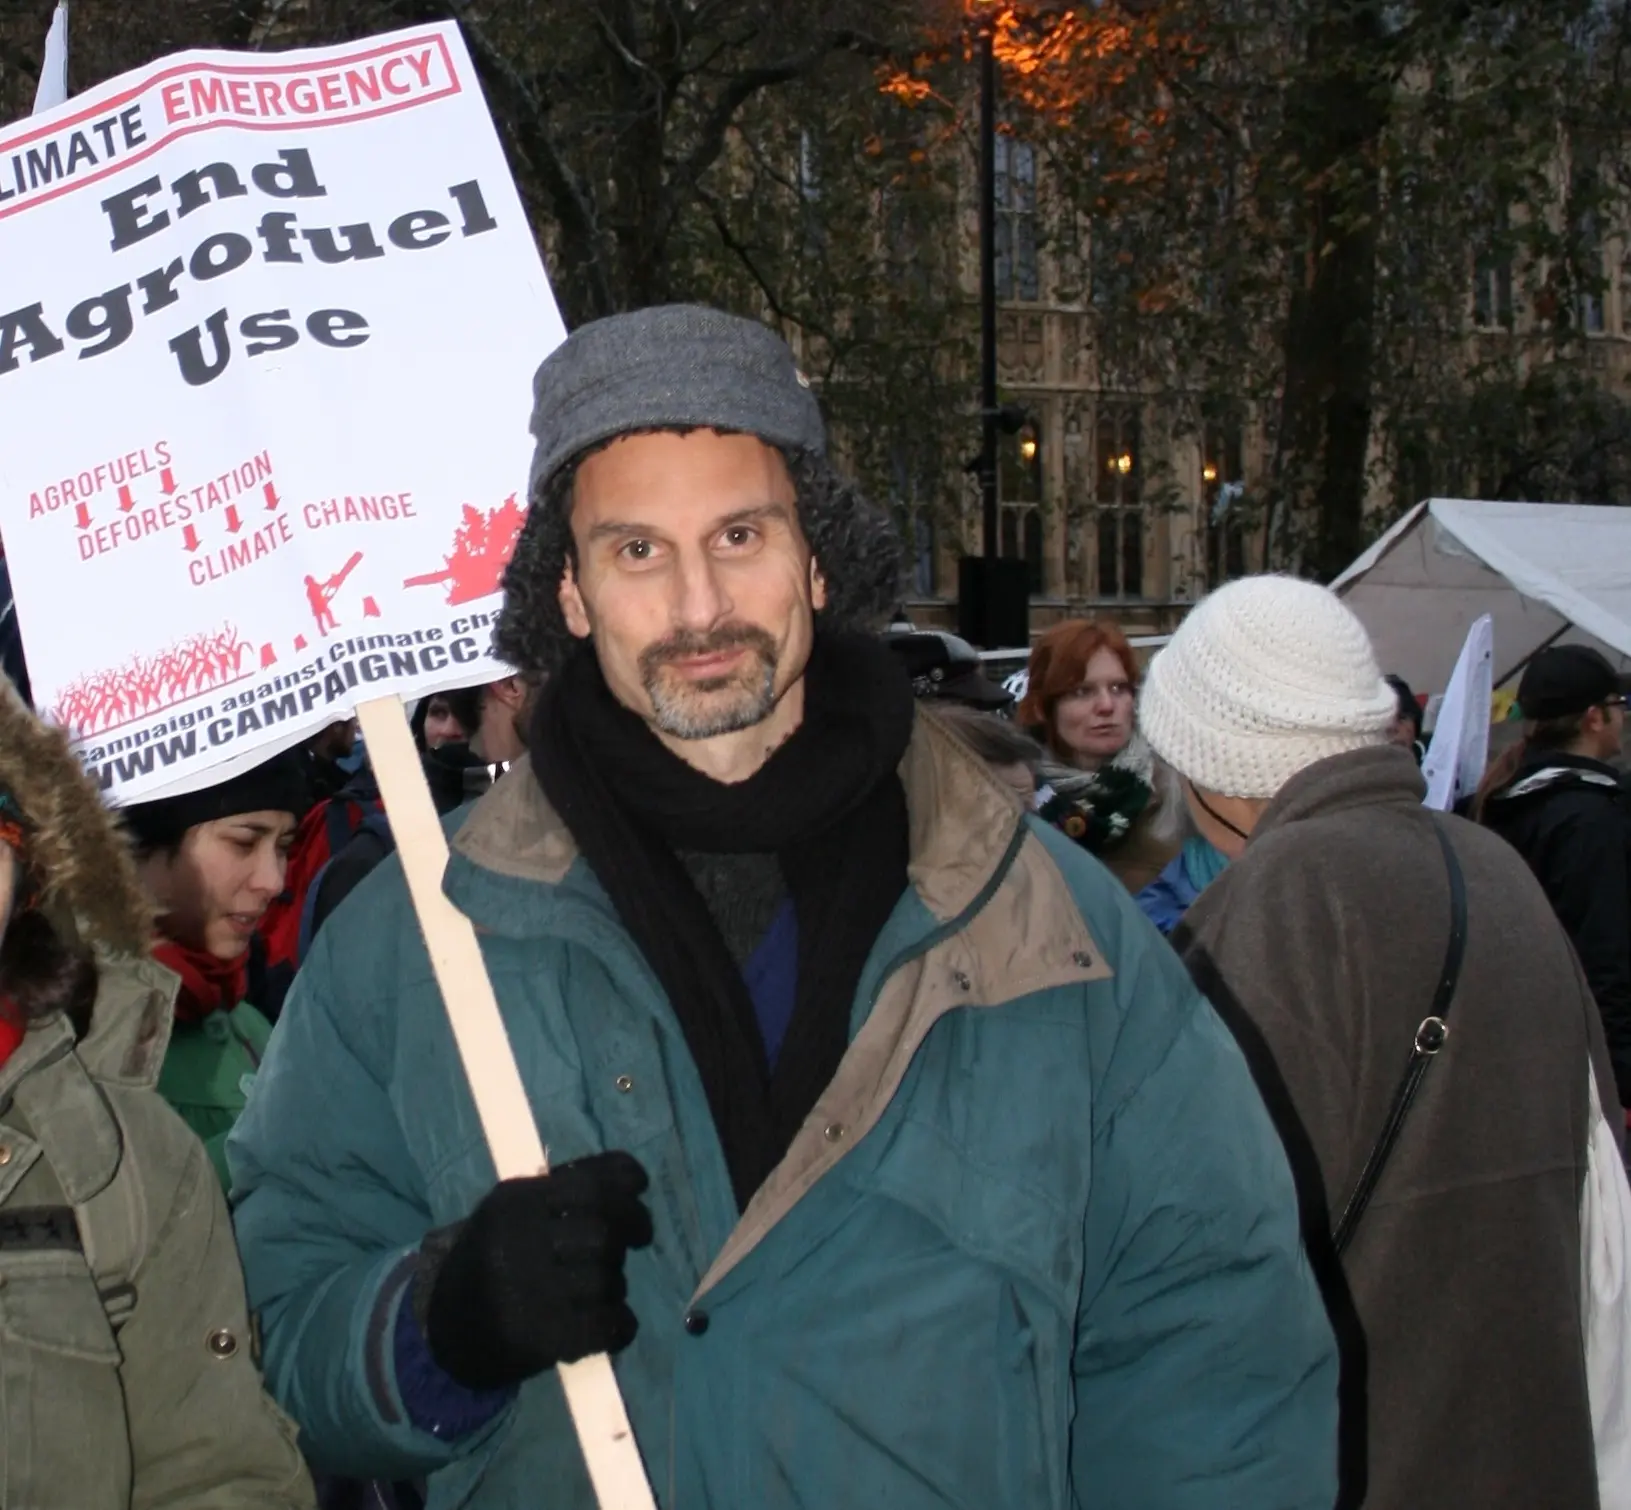 Rob in a hat with earflaps holding placard on demo: 'End Agrofuel Use'